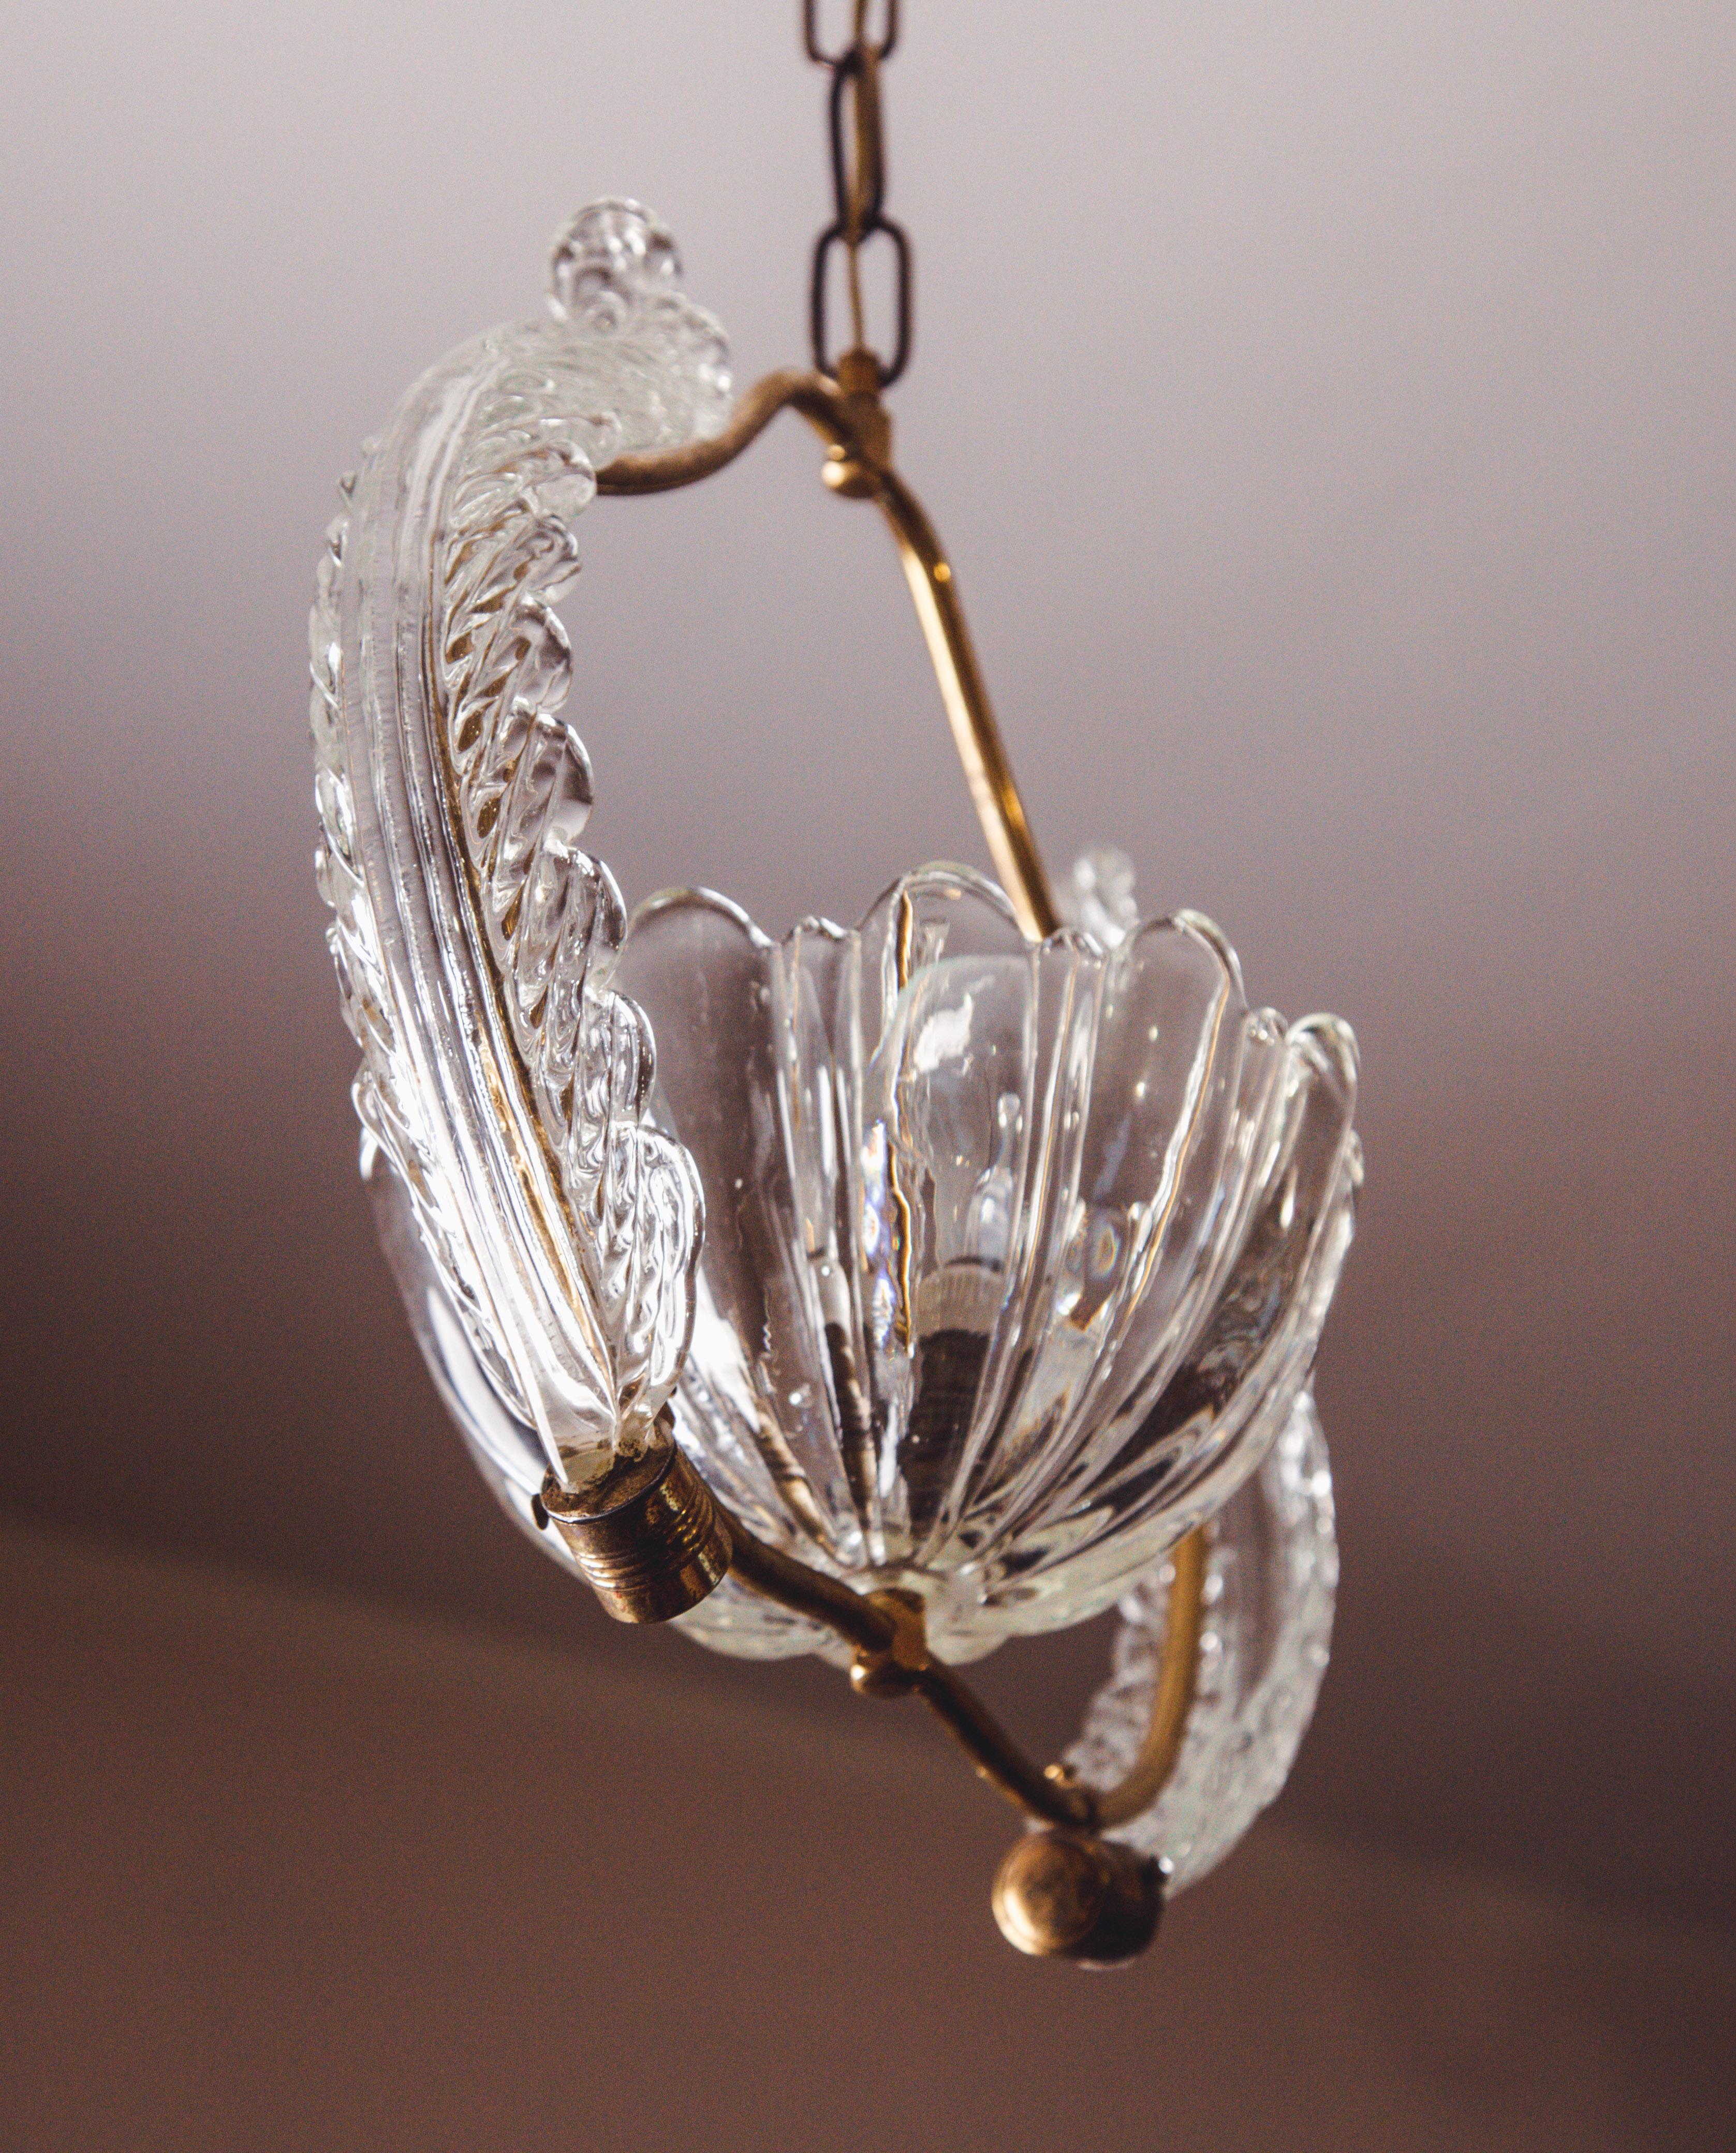 Stunning Art Deco style pendant made by the Barovier & Toso glassworks during the 1940-1950s.
The chandelier is 90 cm high with the chain, 35 cm without chain, 40 cm wide.
It mounts an E27 light. The chandelier consists of 3 glass elements, the only